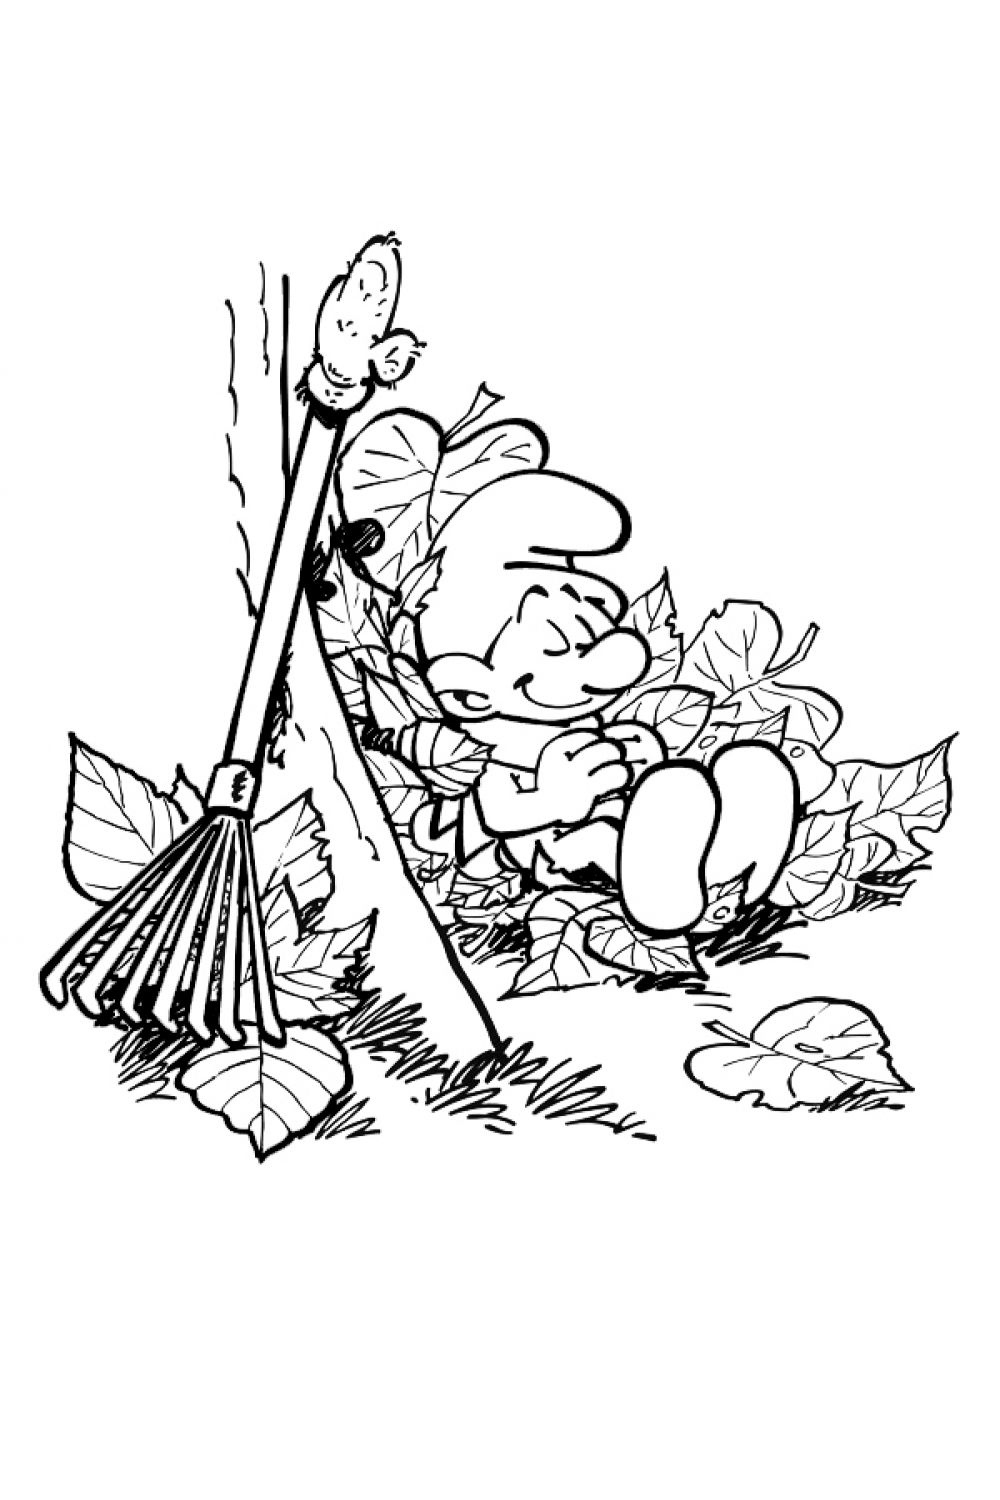 Smurfs Coloring Pages. Print Coloring Pages for free.